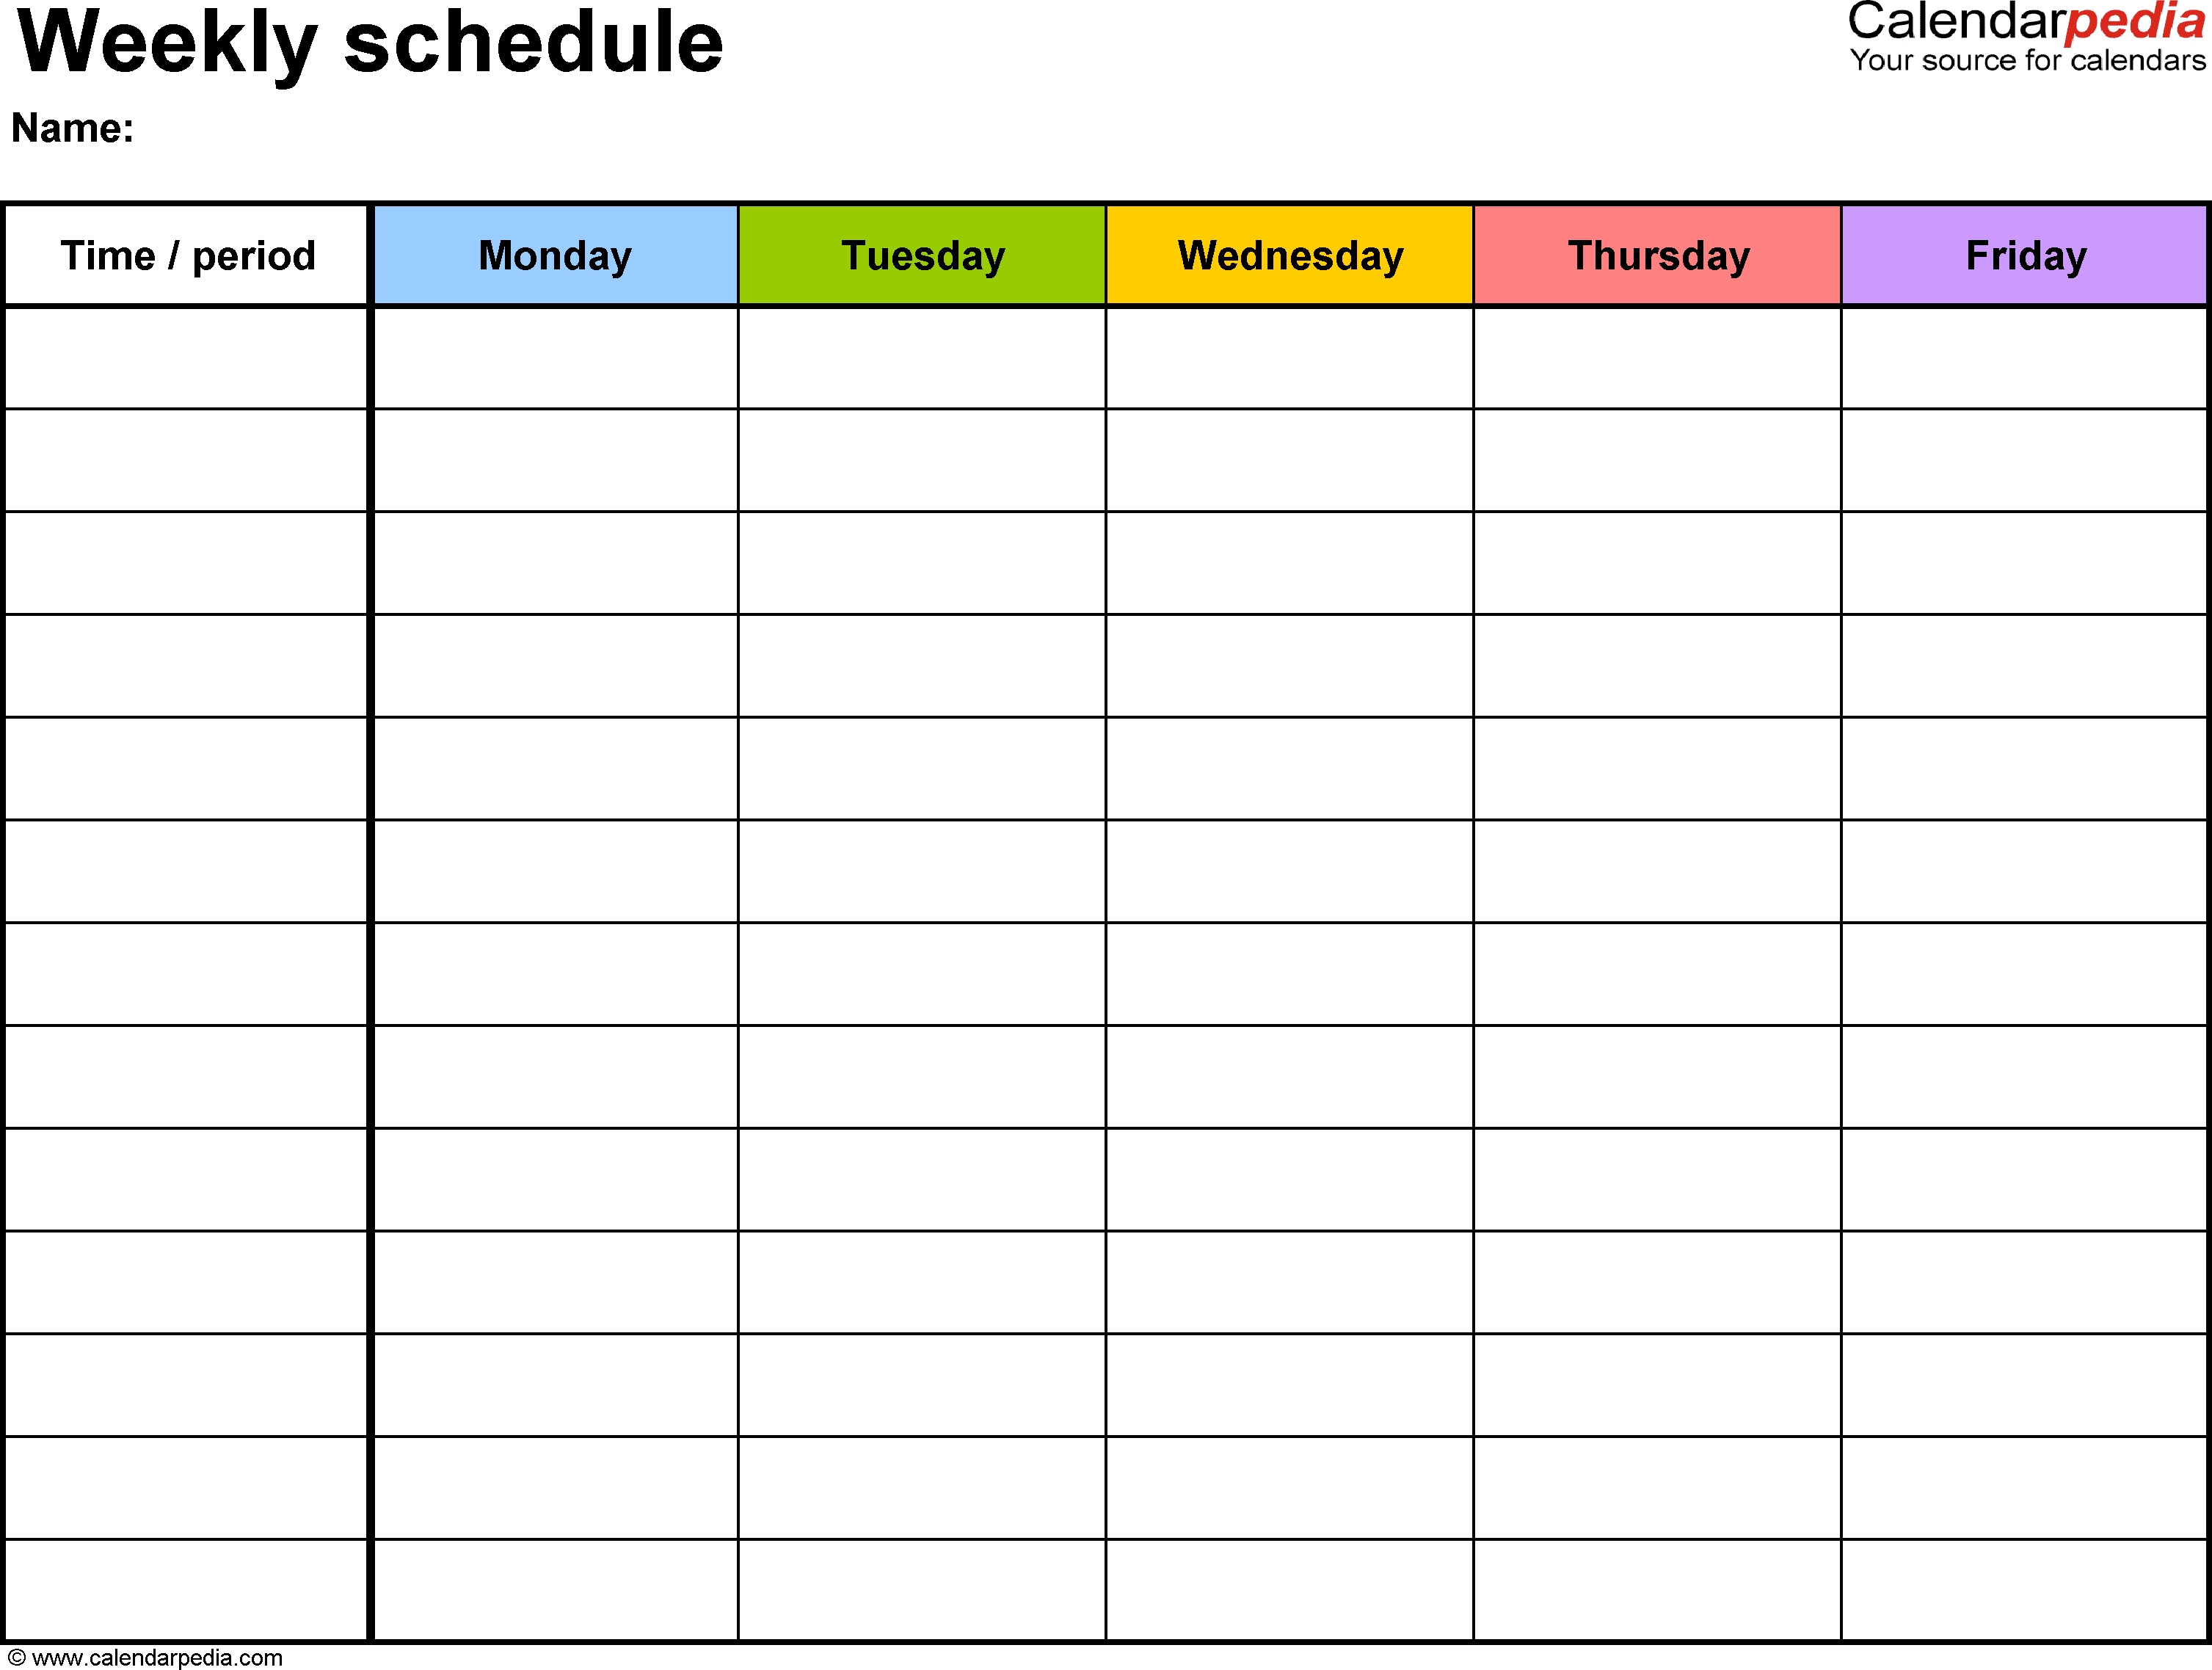 Free Weekly Schedule Templates For Pdf - 18 Templates intended for Printable Weekly Planner Calendar Template